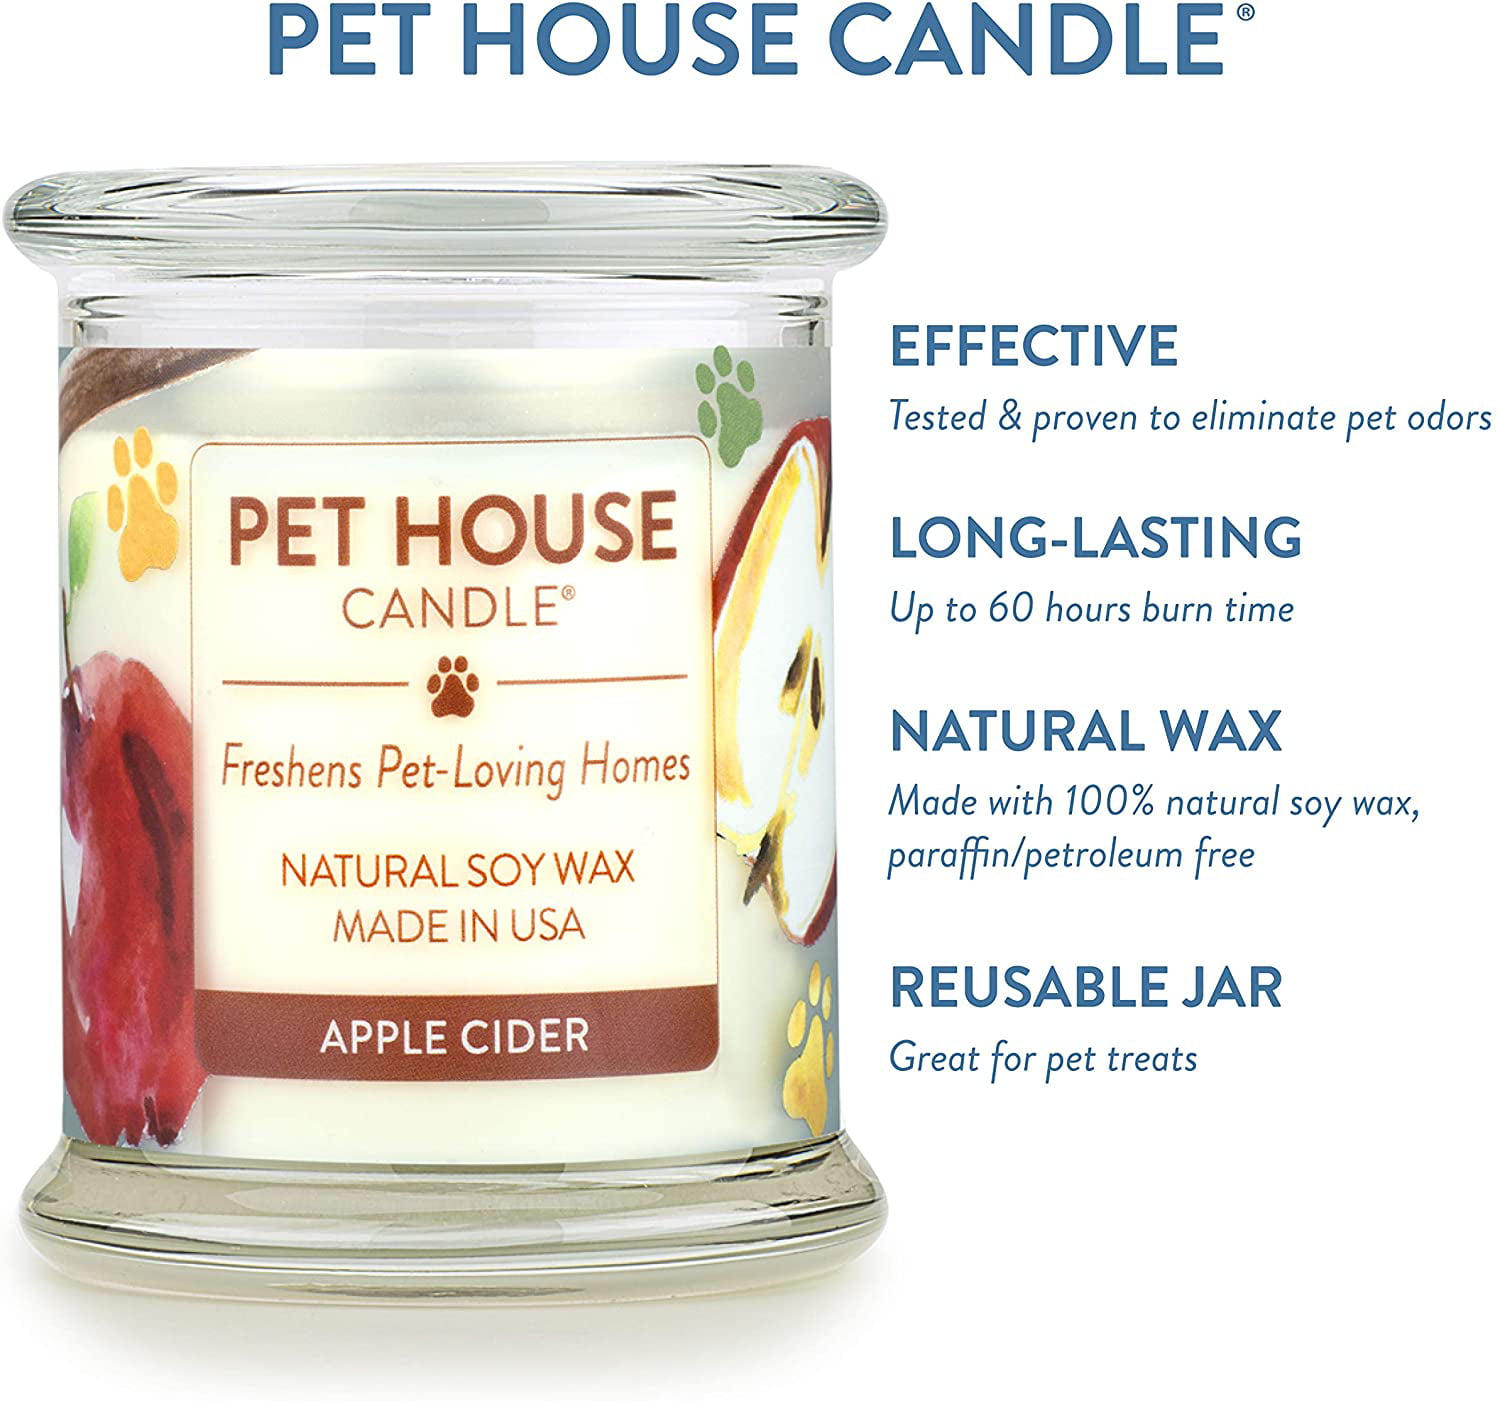 Non-Toxic Candy Cane One Fur All Up to 60 Hrs Hrs Burn Time Pet House Candle Pet Odor Eliminator 100% Natural Soy Wax Candle Reusable Glass Jar Scented Candles 20 Fragrances